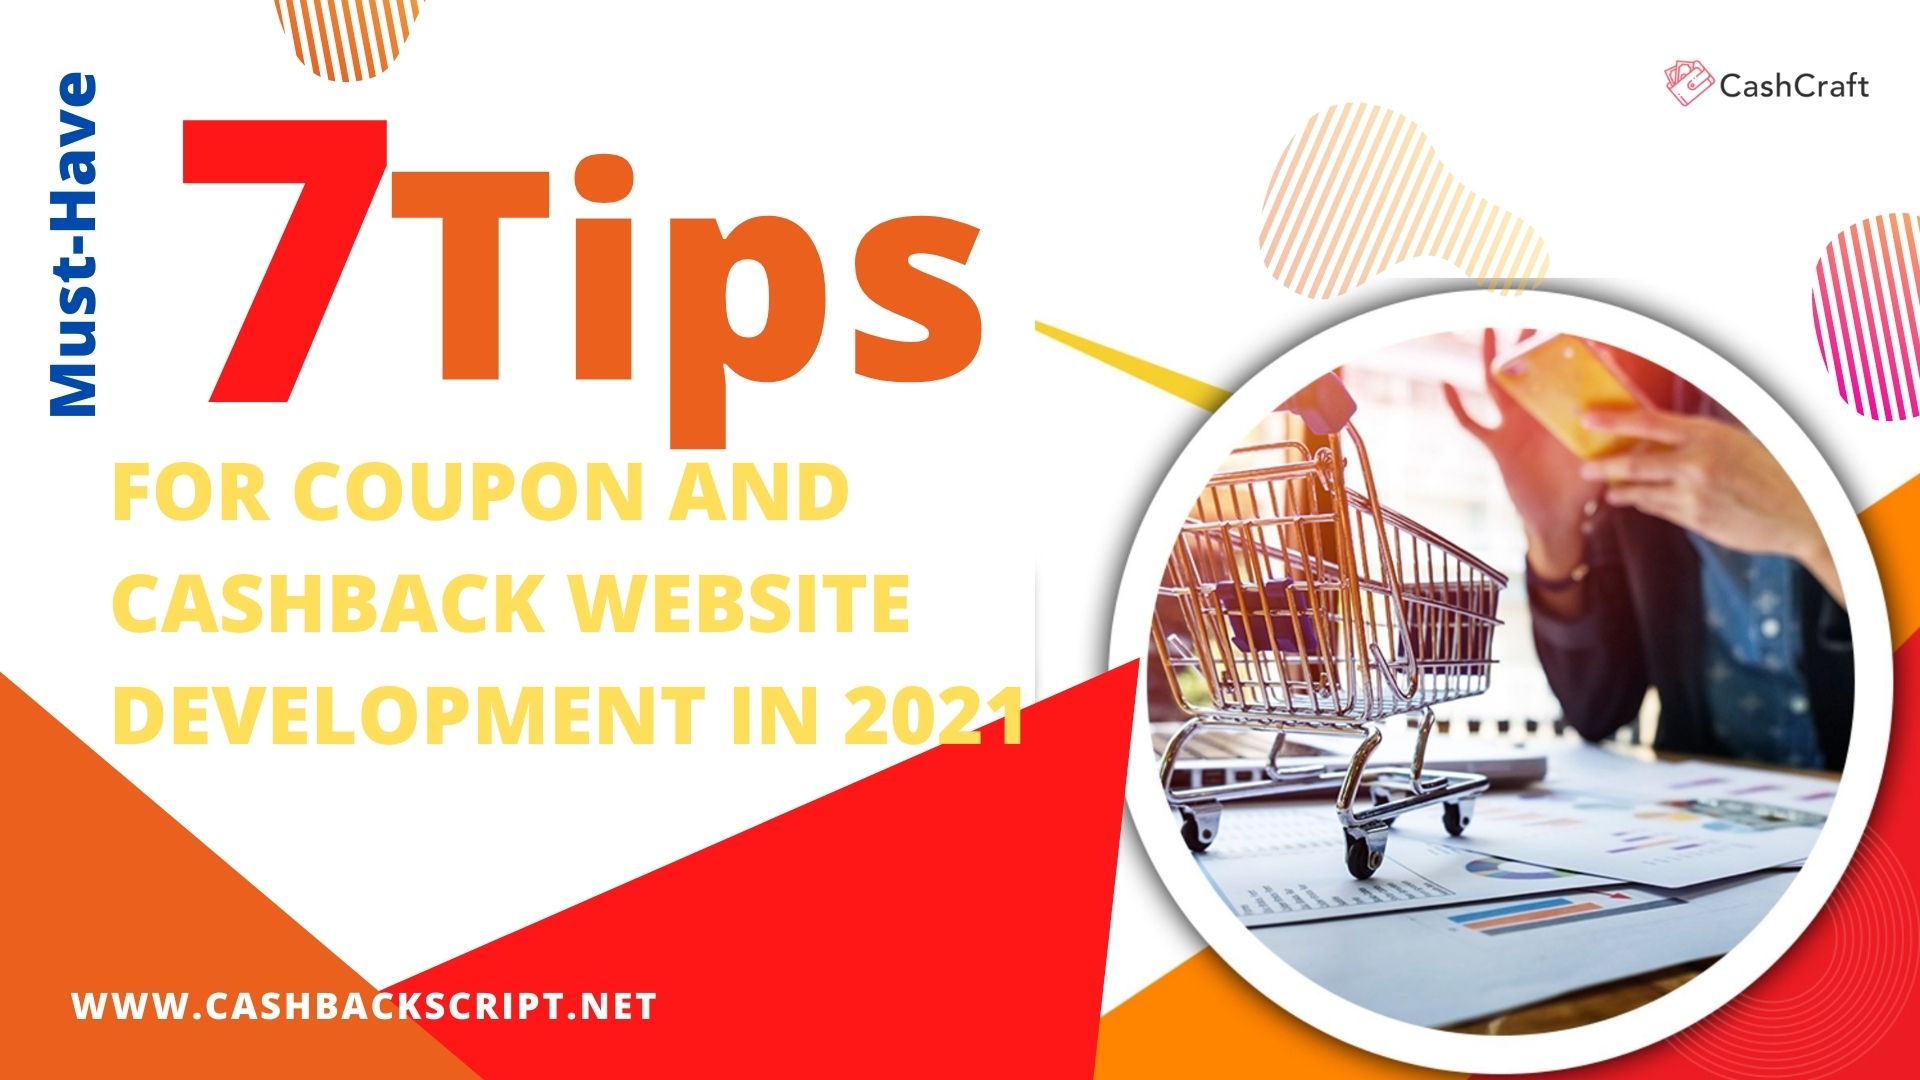 7 Tips to Develop Cashback and Coupon Website In 2021